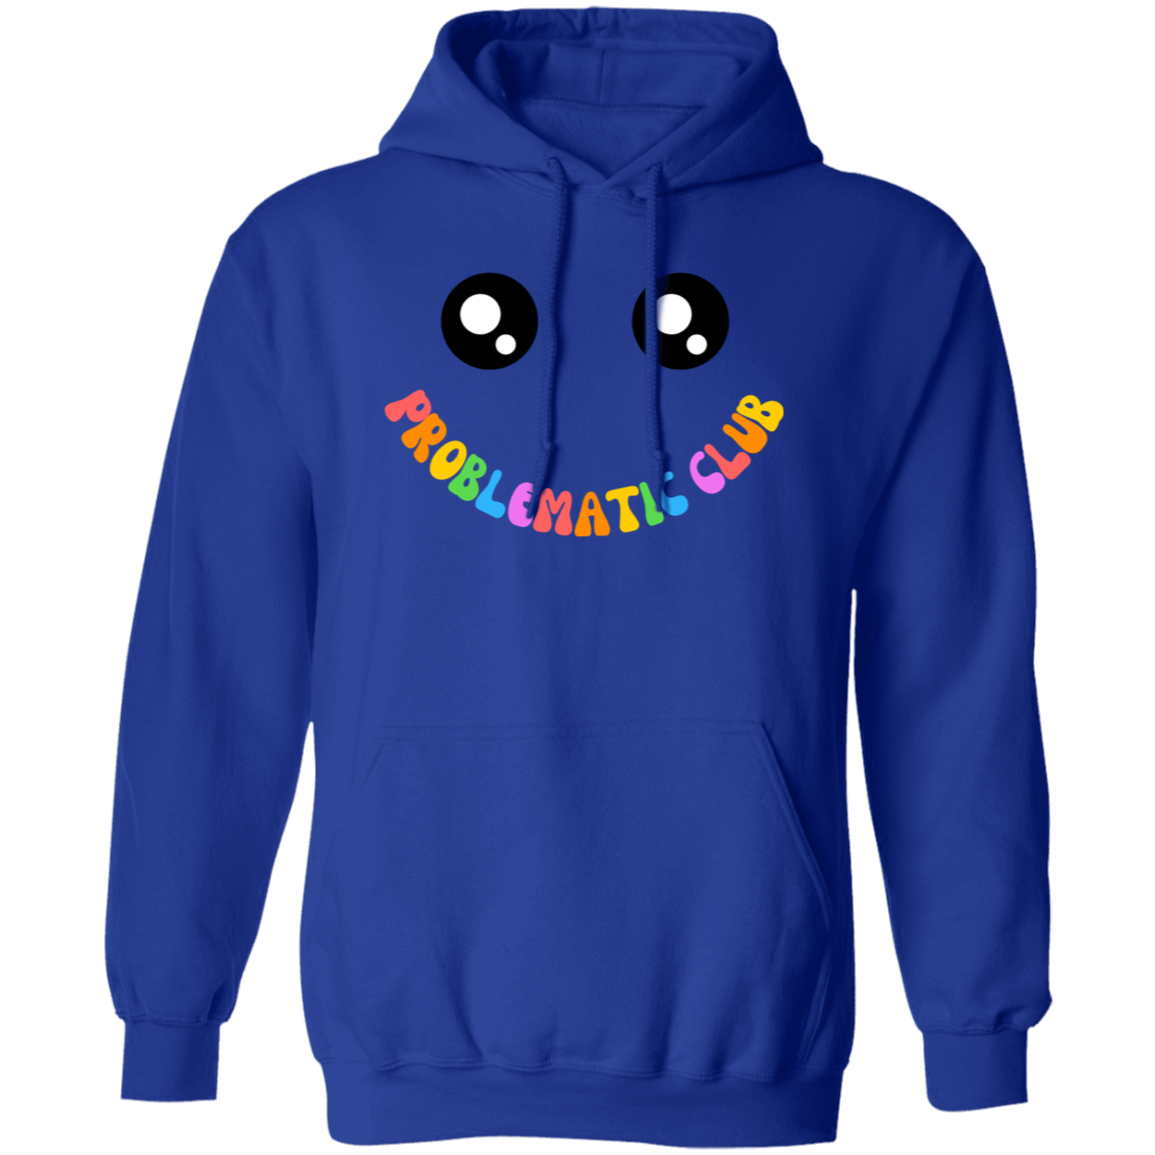 Problematic Club Hoodie